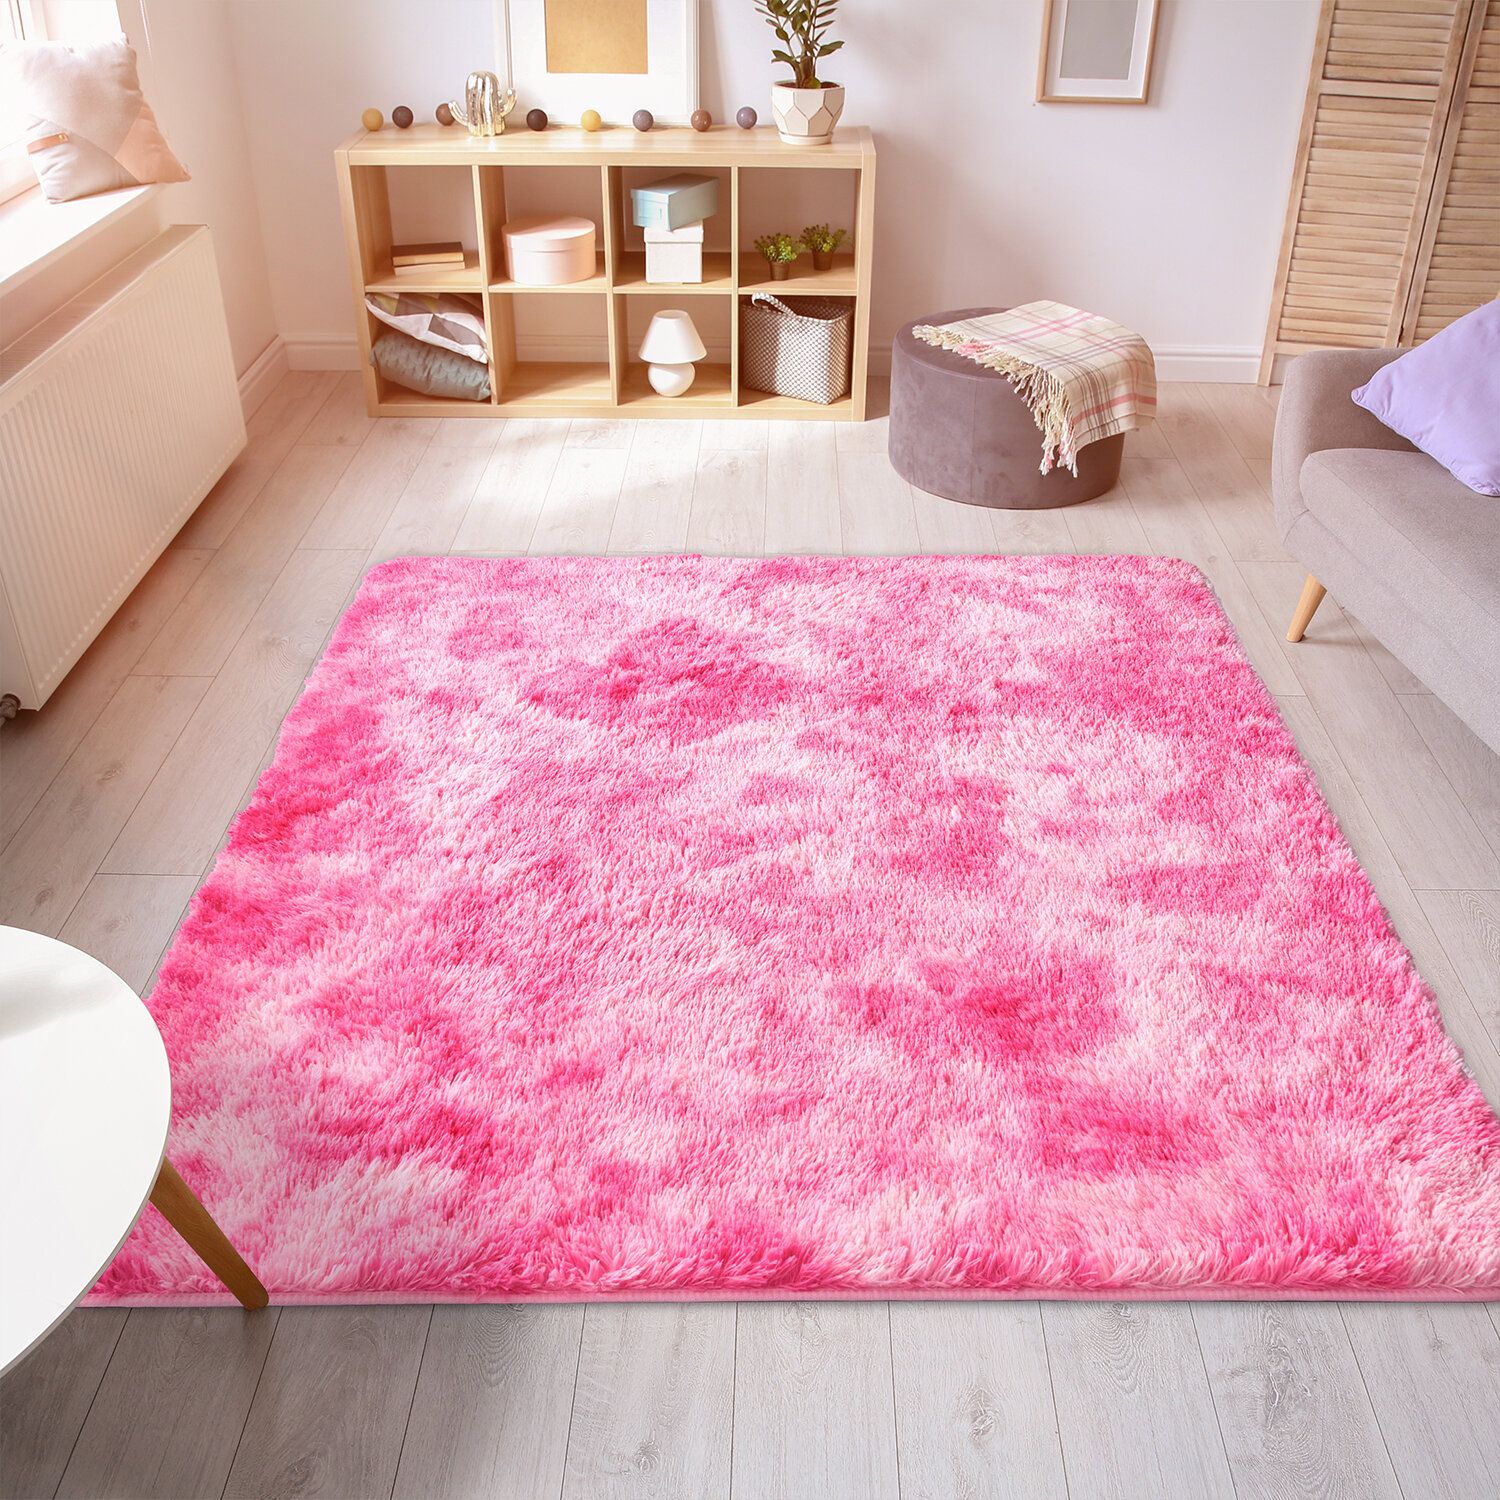 Mercer41 Belgard Machine Tufted Performance Pink Rug & Reviews | Wayfair Pertaining To Pink Soft Touch Shag Rugs (Photo 5 of 15)